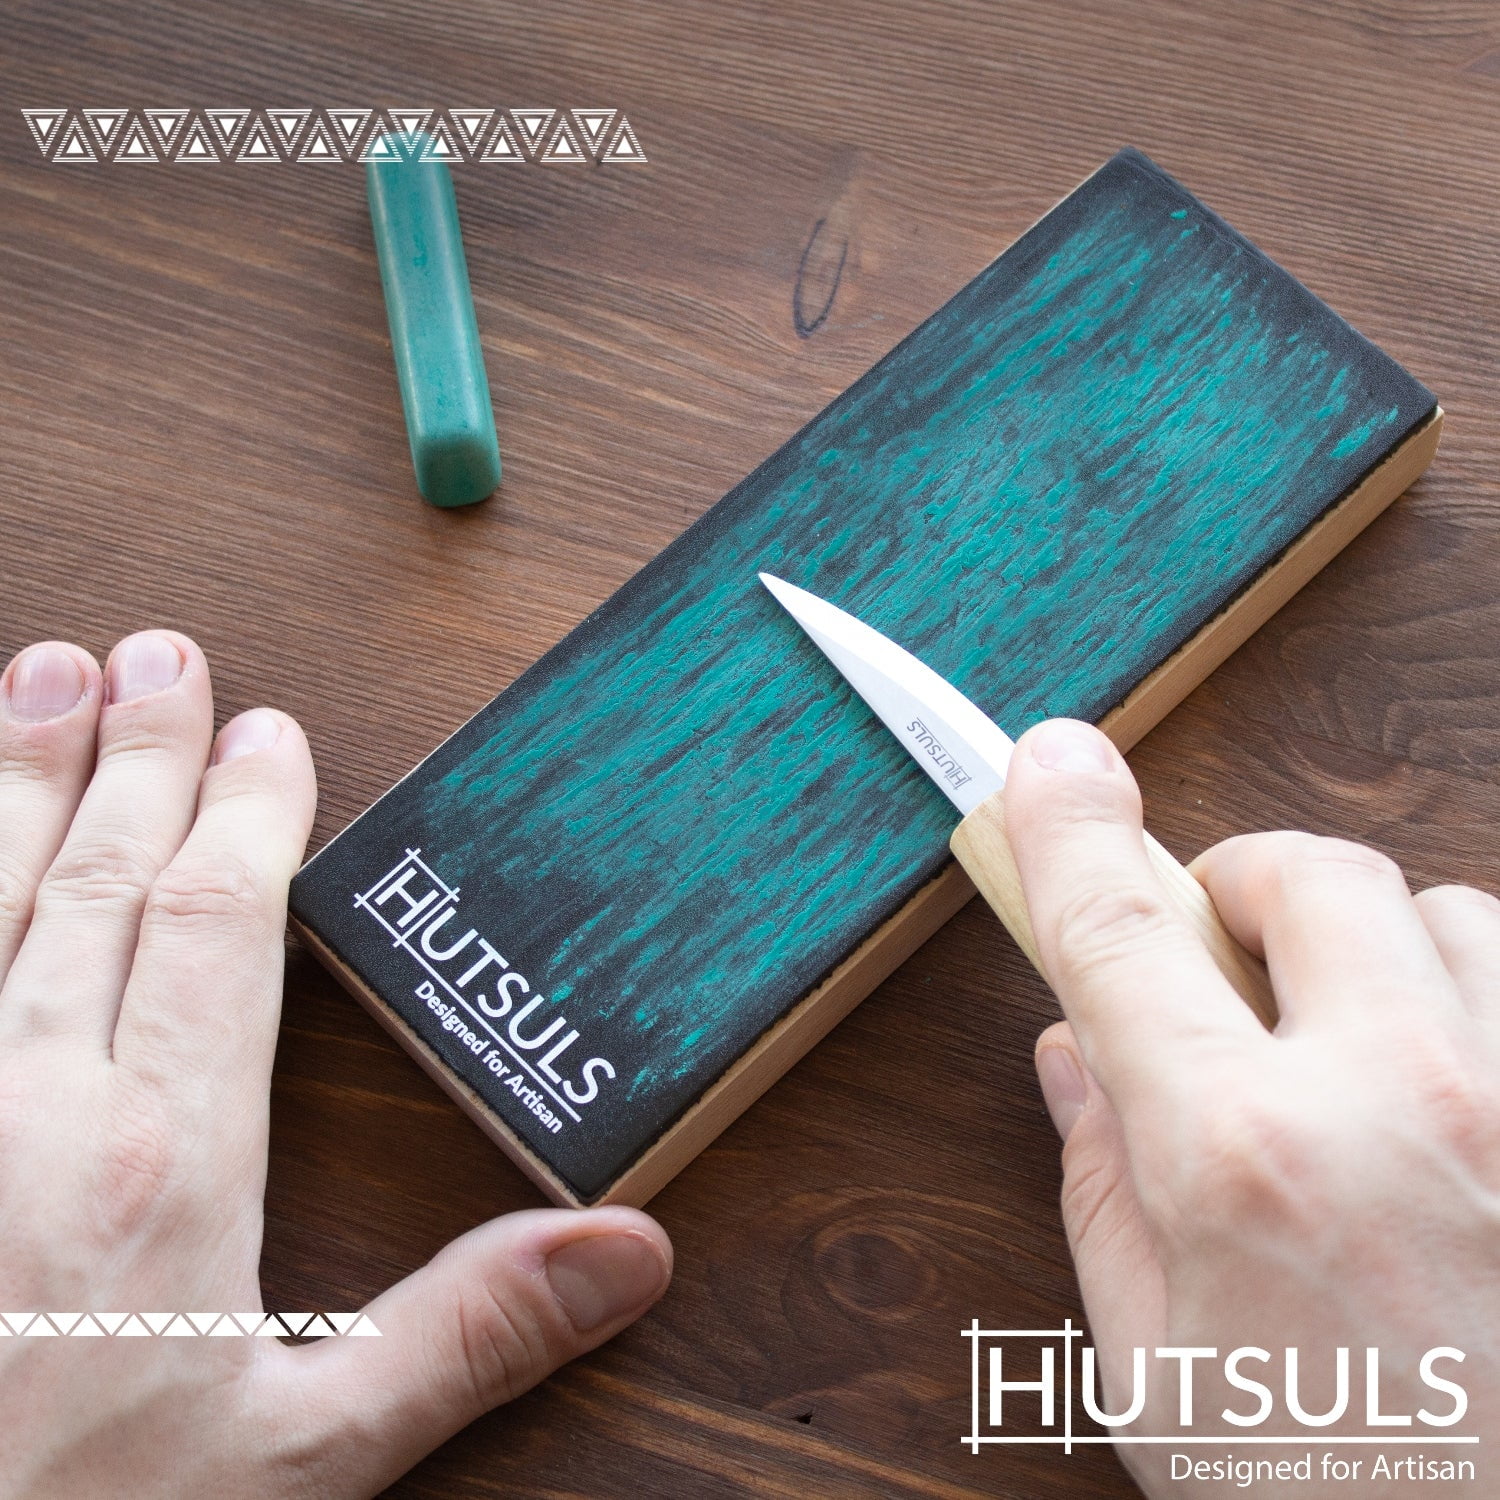 Hutsuls Brown Leather Strop with Compound - Get Razor-Sharp Edges with  Stropping Kit, Green Honing Compound & Vegetable Tanned Two Sided Knife